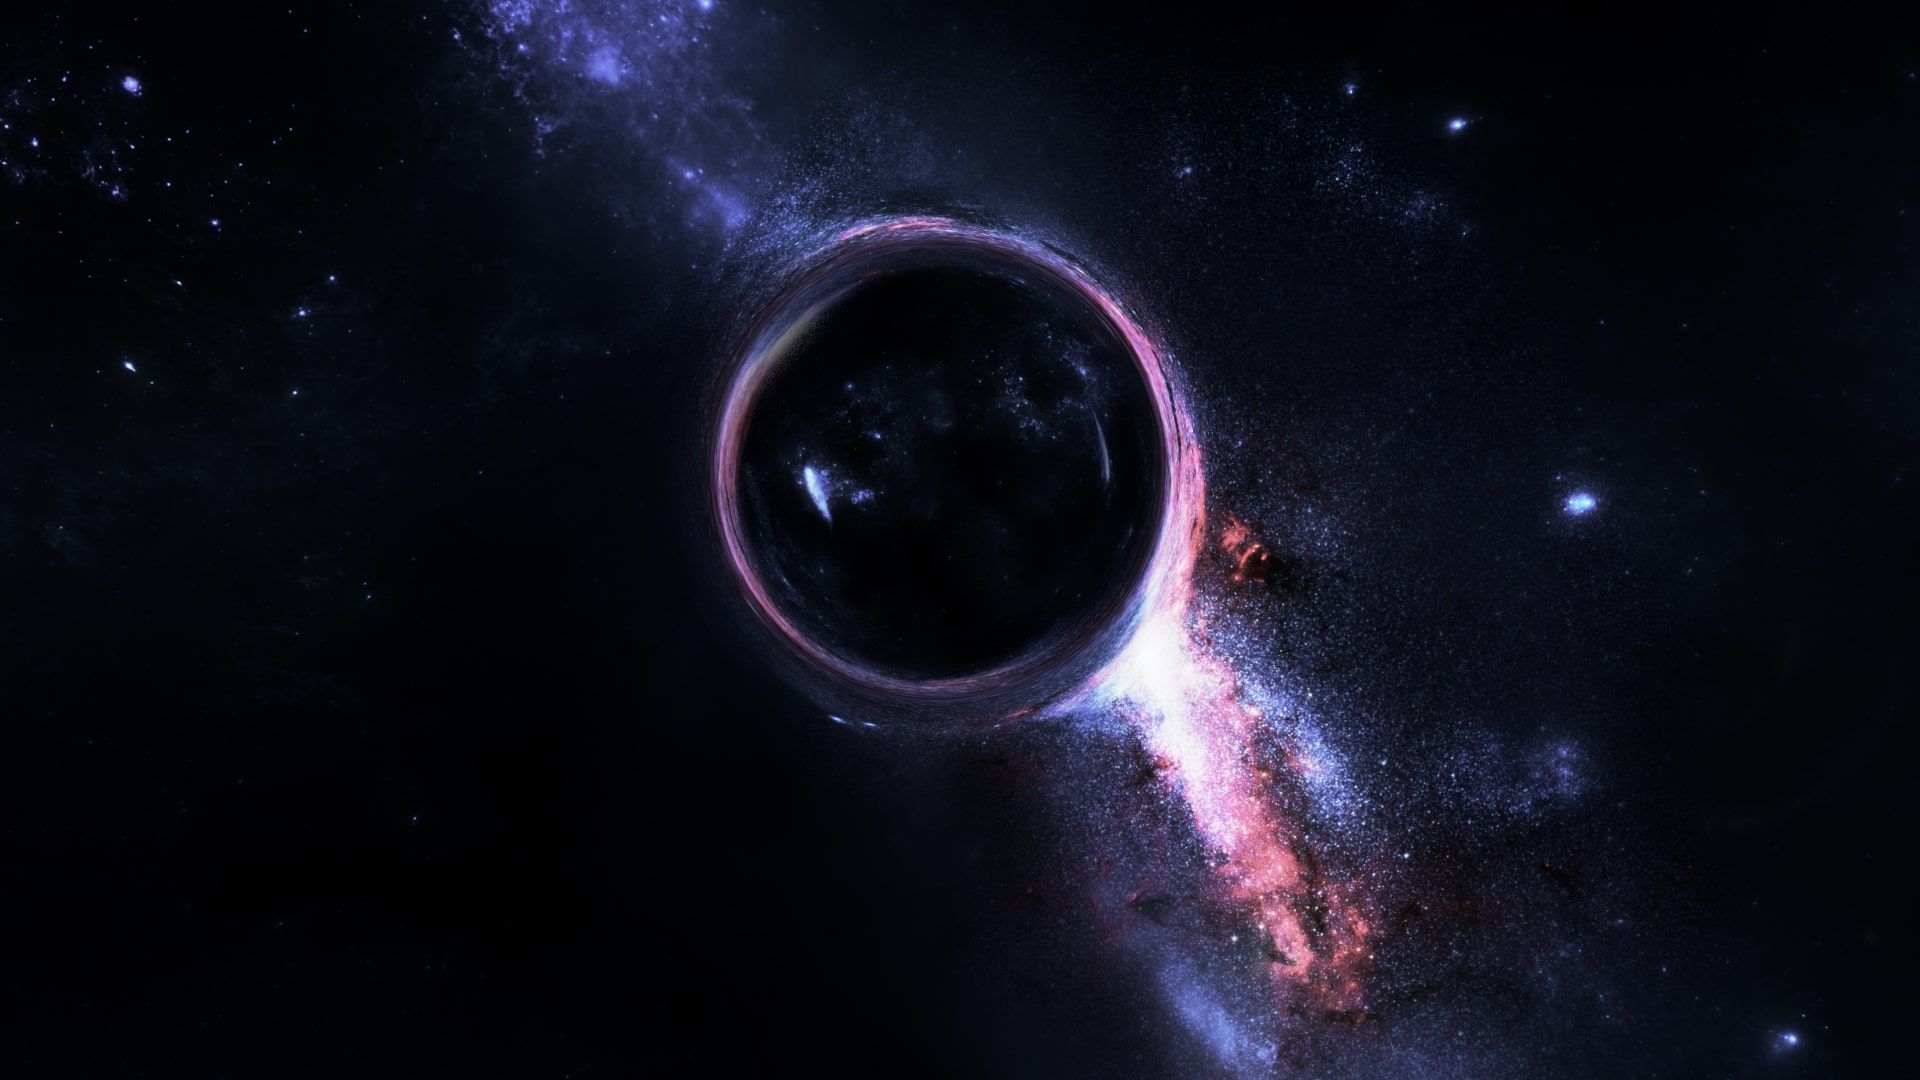 80+ Sci Fi Black Hole HD Wallpapers and Backgrounds